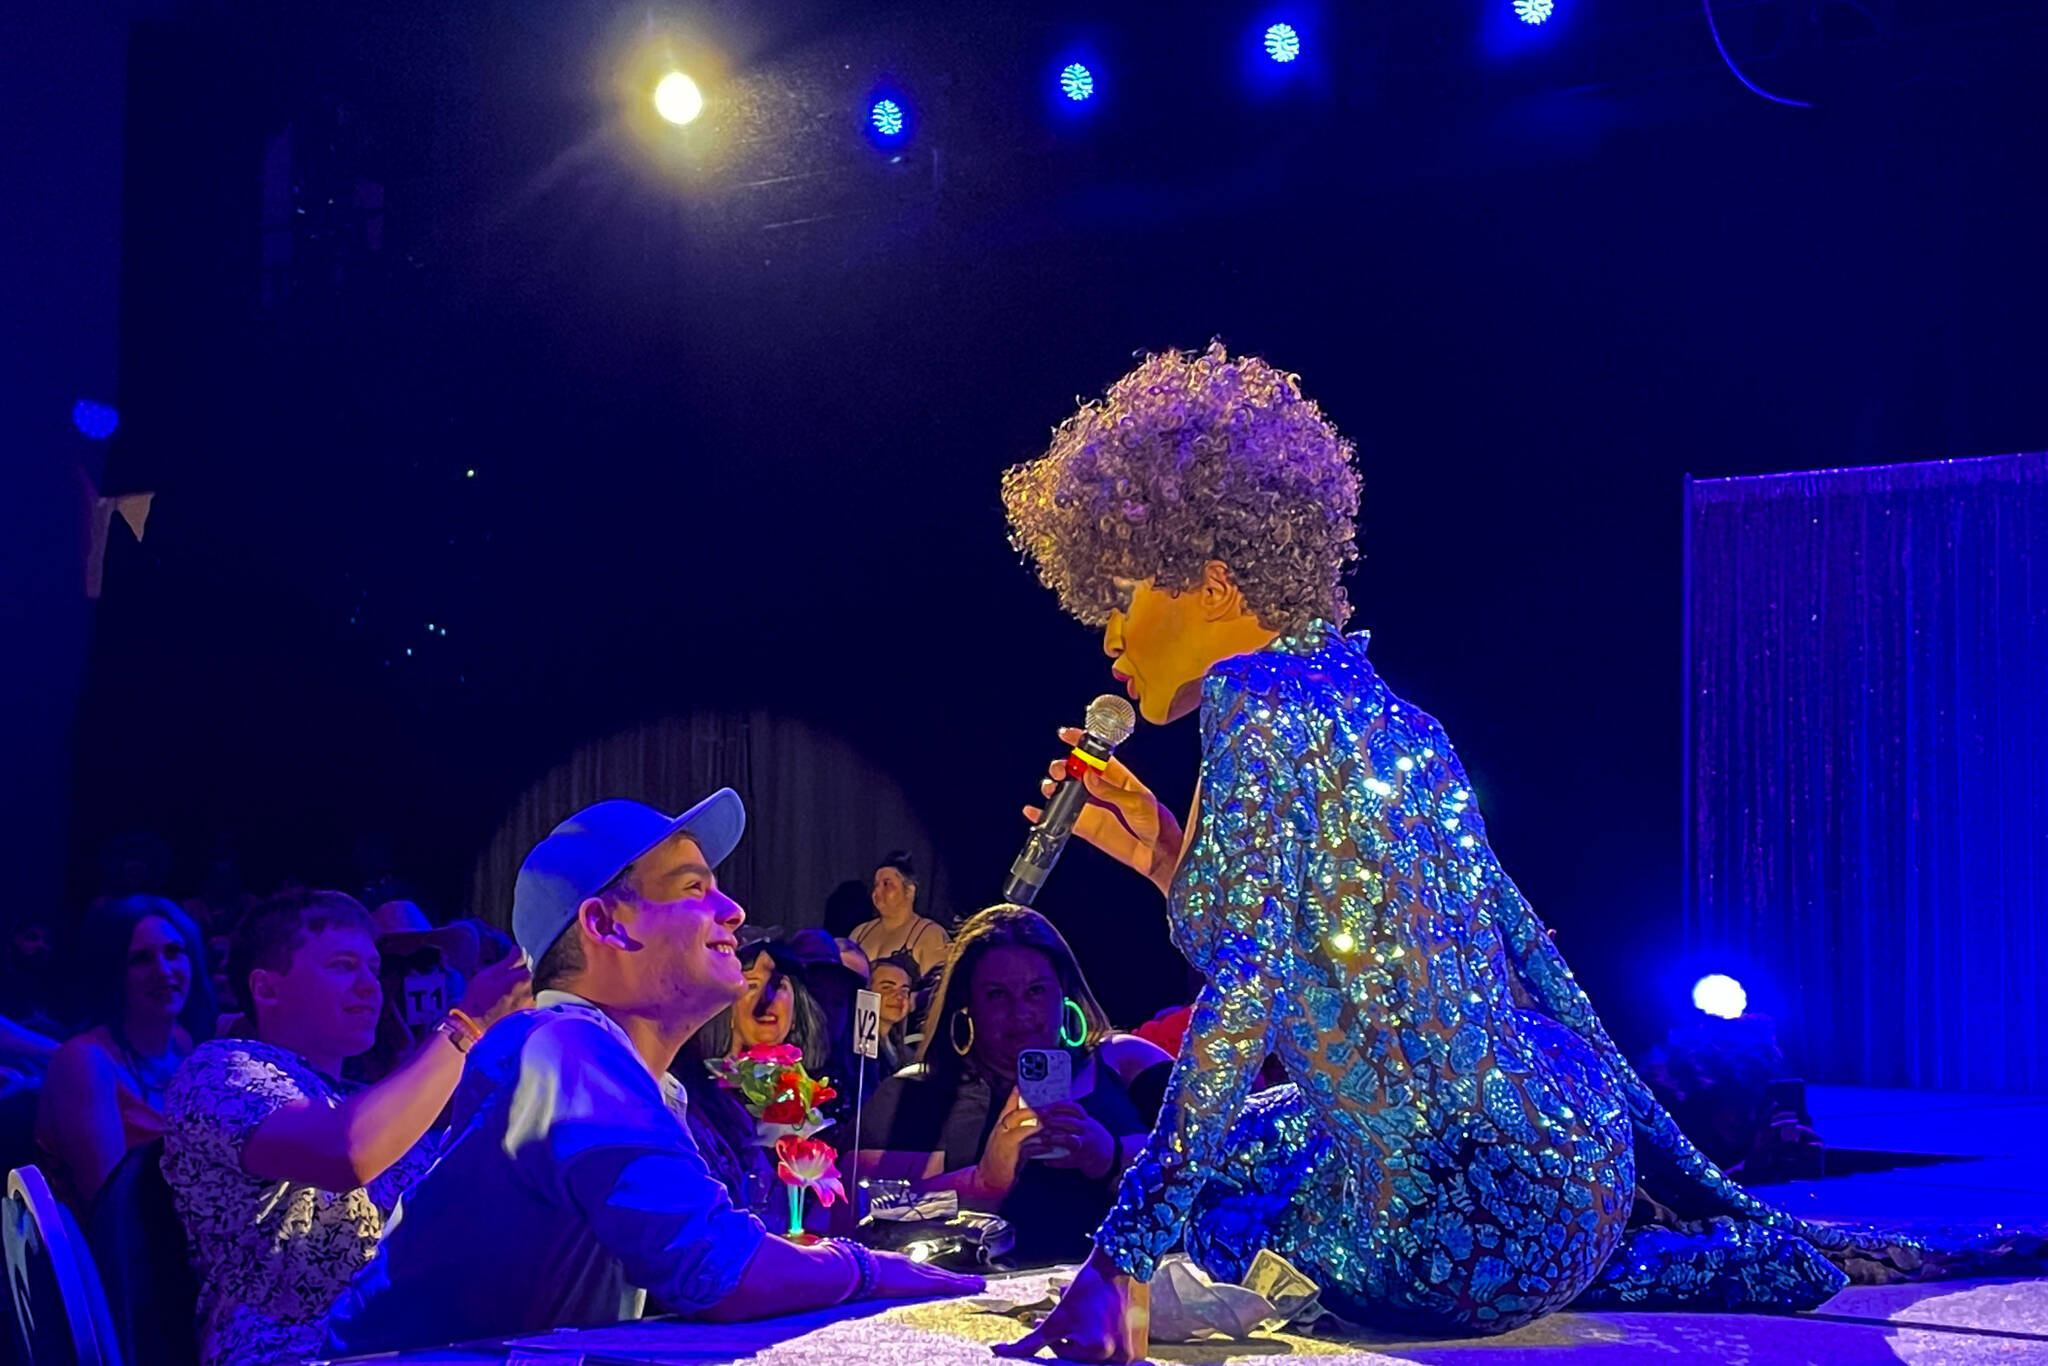 Trinity K. Bonet, one of the headliners, sings to a member of the audience during Glitz, a major annual drag event celebrated every Pride Month, at Centennial Hall on June 18, 2022. (Michael S. Lockett / Juneau Empire)